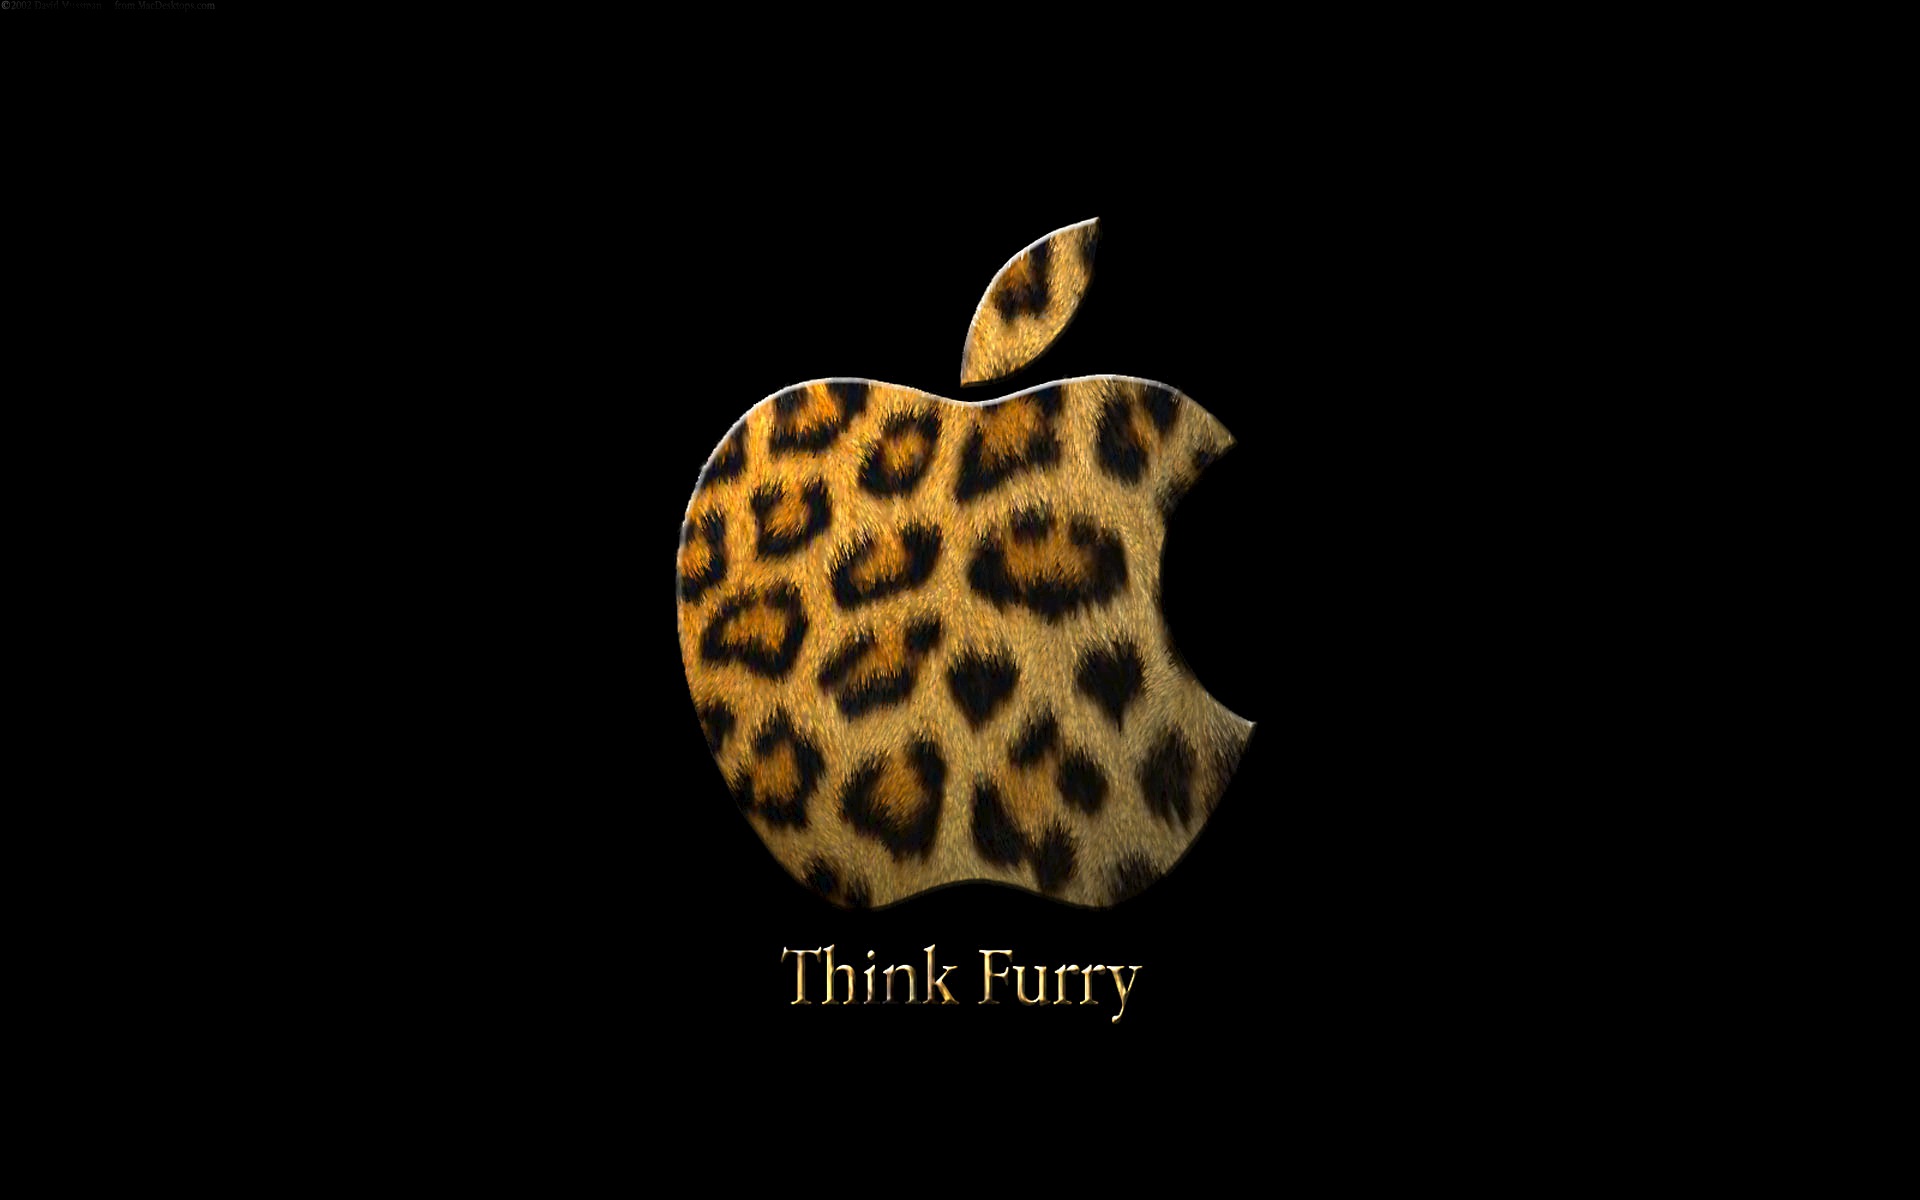 The Think Furry Wallpaper iPhone